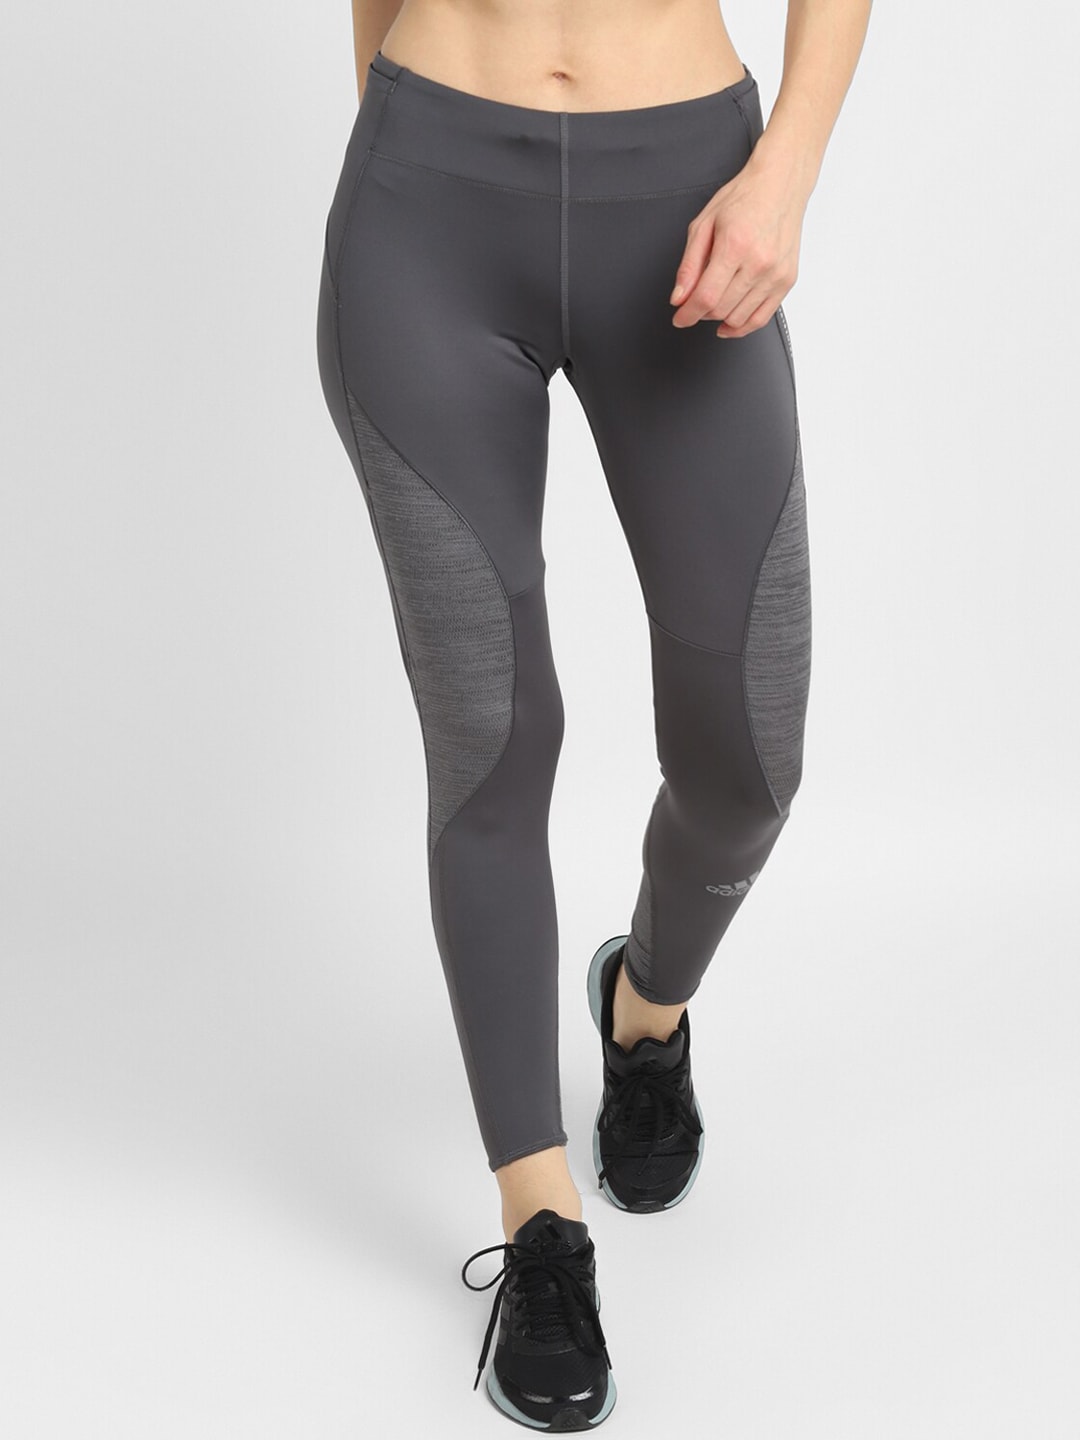 ADIDAS Women Grey Solid Tights Price in India